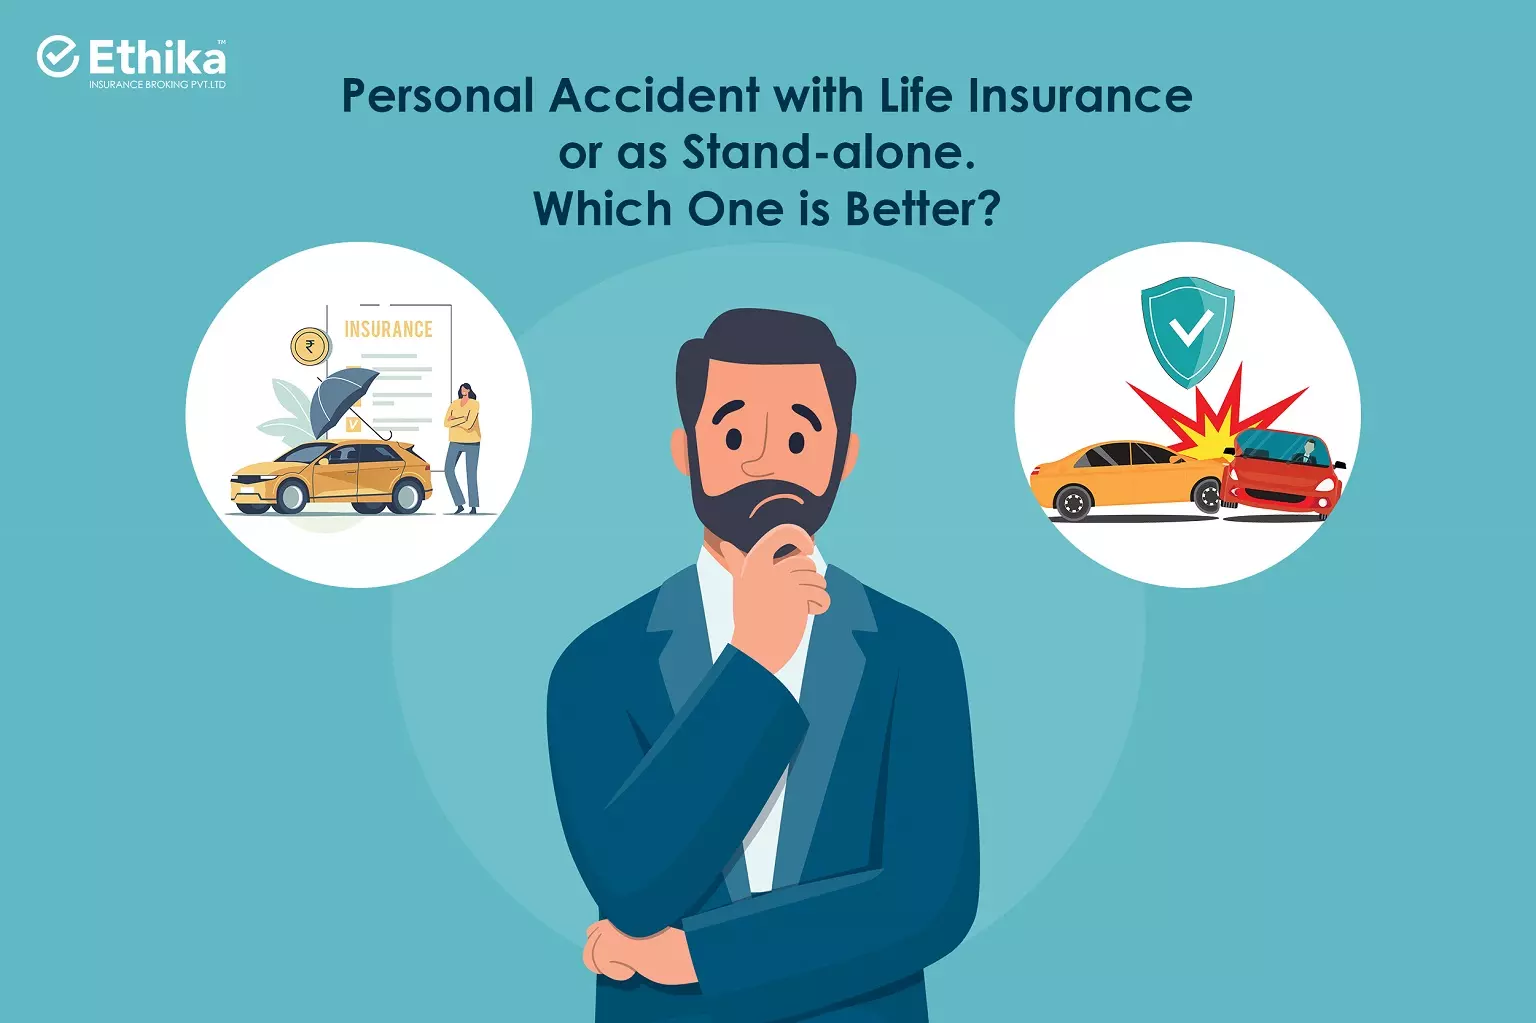 Personal Accident with Life Insurance or as Stand-alone. Which One is Better?